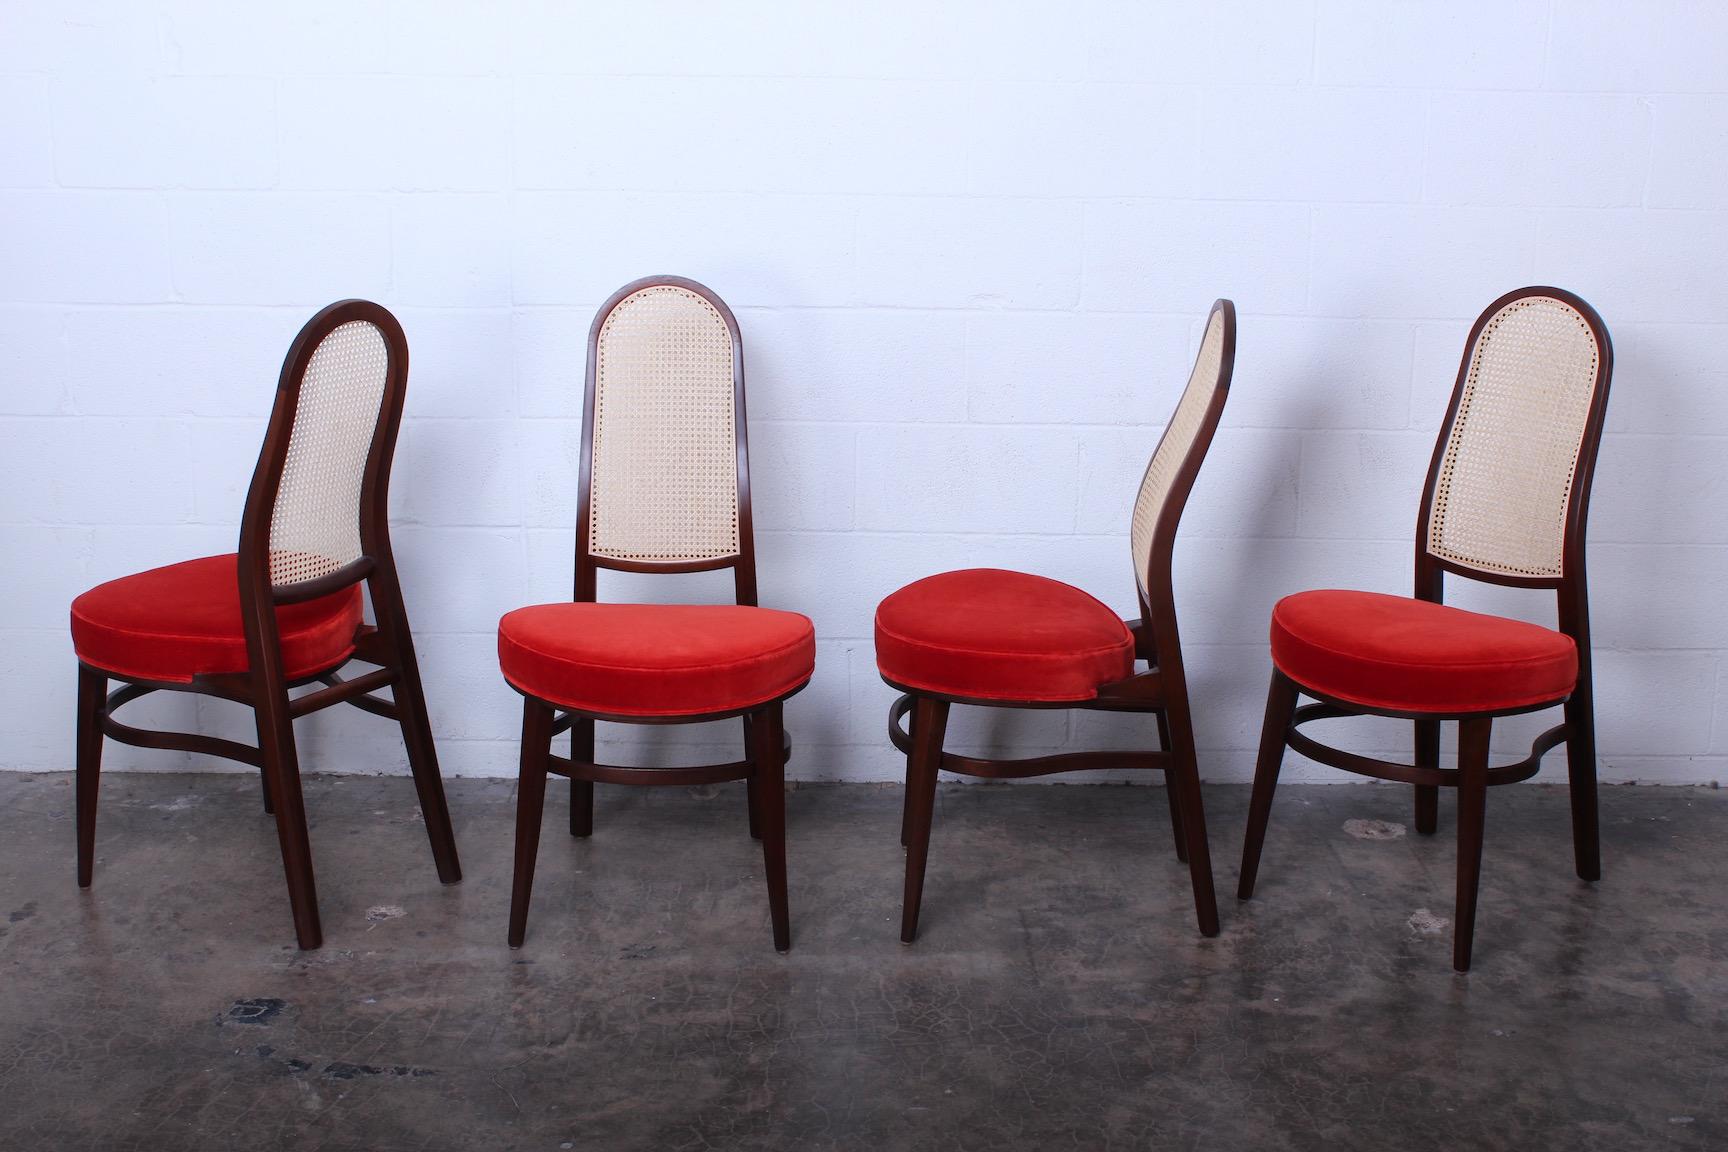 A rare set of four cane back dining chairs with mahogany frames. Designed by Edward Wormley for Dunbar. Beautifully restored.